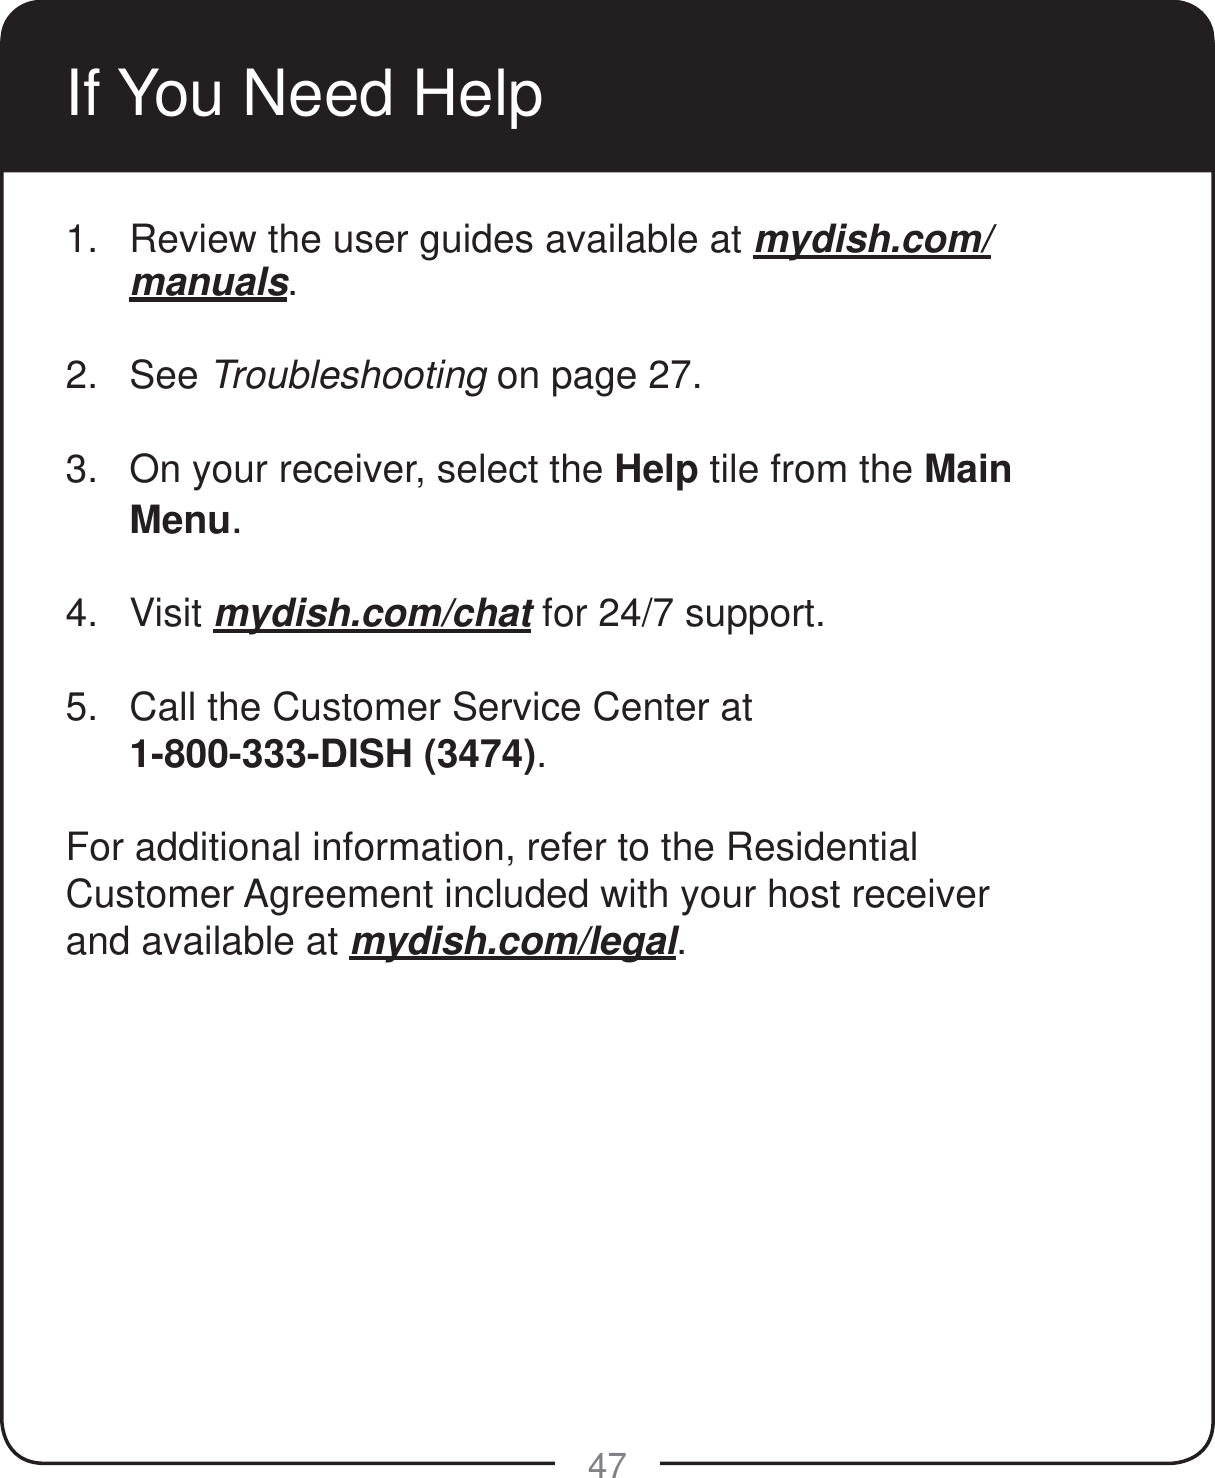 47If You Need Help1.  Review the user guides available at mydish.com/manuals. 2. See Troubleshooting on page 27. 3.  On your receiver, select the Help tile from the Main Menu. 4. Visit mydish.com/chat for 24/7 support. 5.  Call the Customer Service Center at  1-800-333-DISH (3474). For additional information, refer to the Residential Customer Agreement included with your host receiver and available at mydish.com/legal.